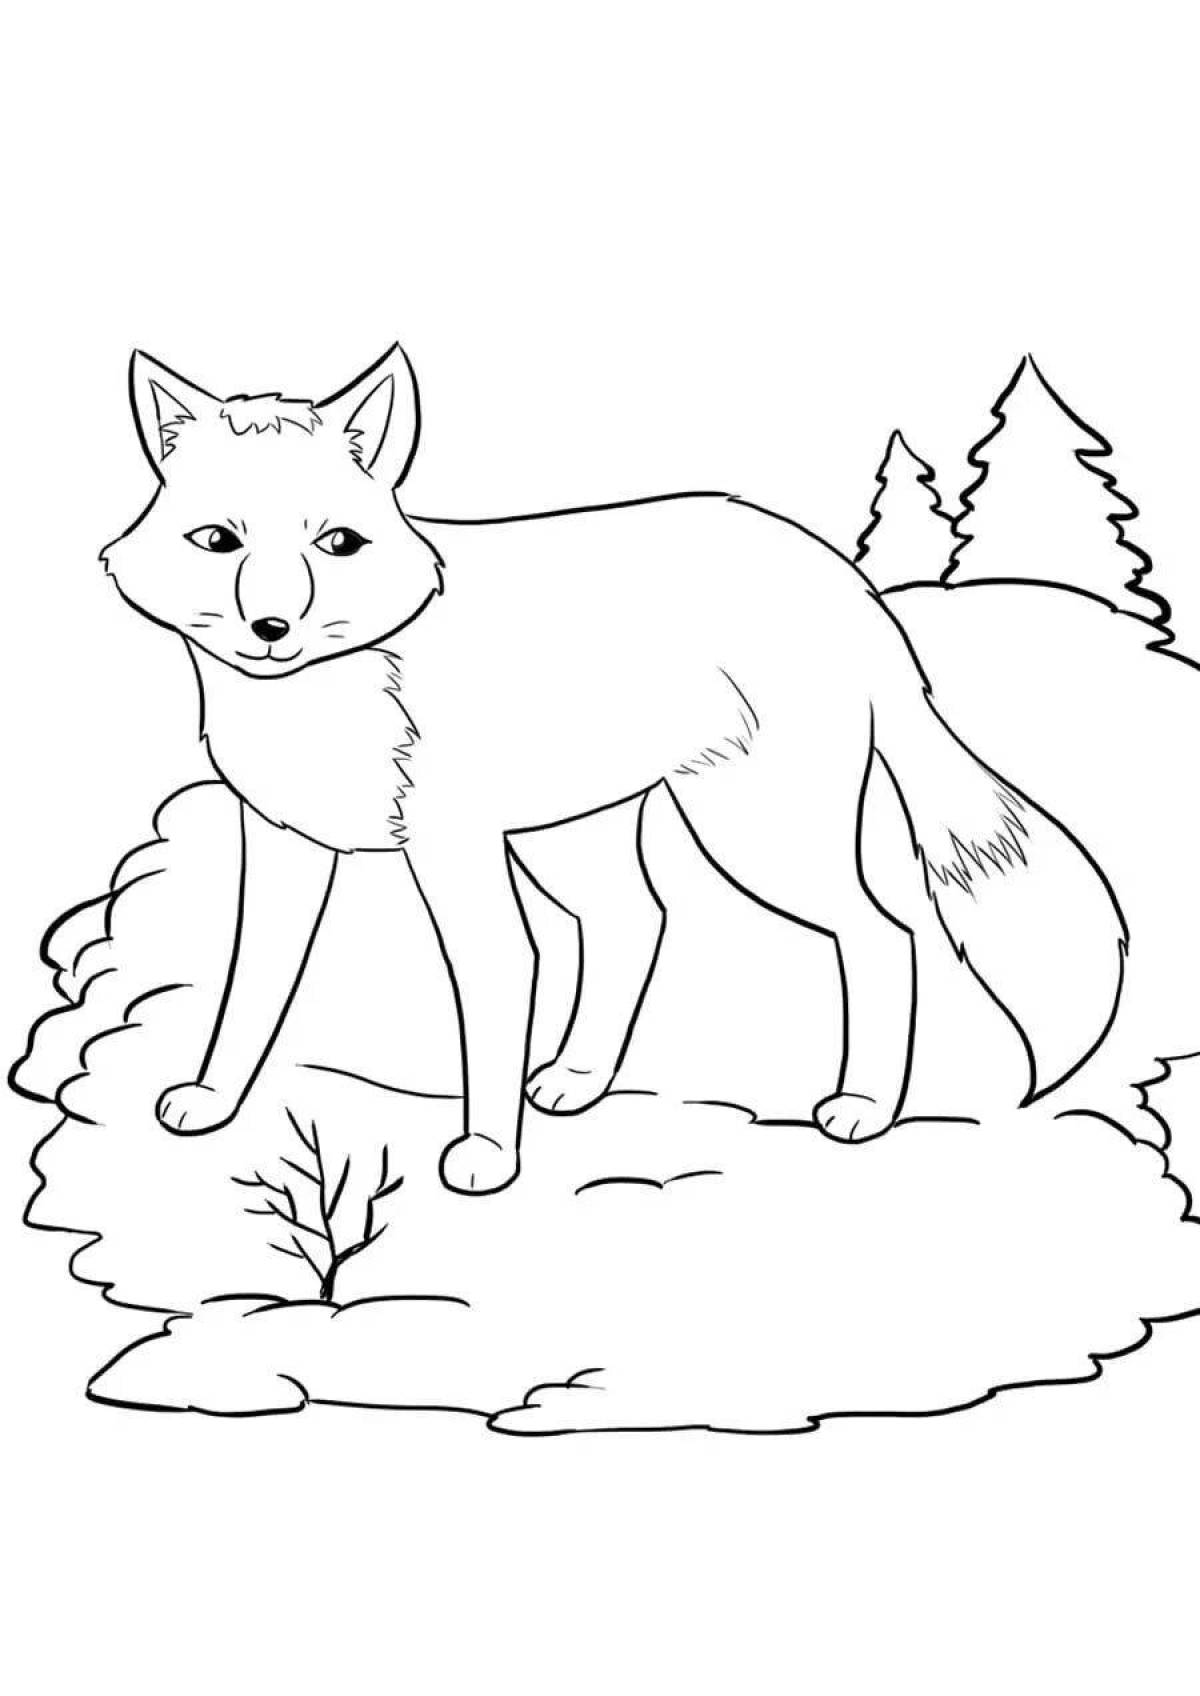 Adorable coloring book for kids wild animals in winter